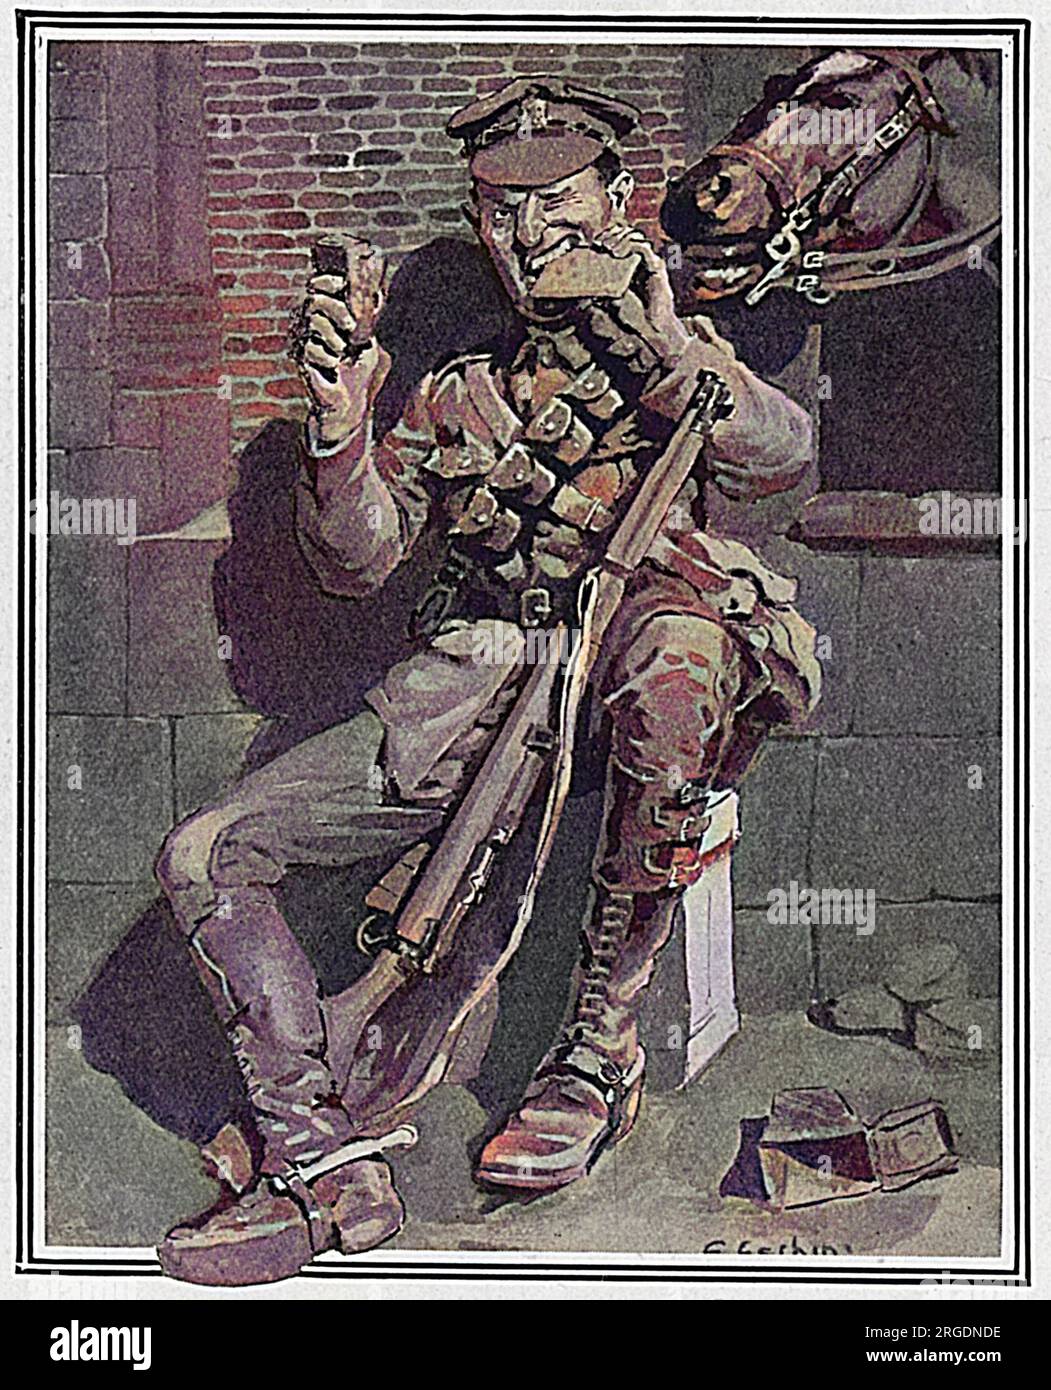 A humorous cartoon by a serving soldier, Sapper E. G. Eschini showing a British soldier gnawing at the tough and unpalatable biscuits and beef, typical rations during the First World War. Stock Photo